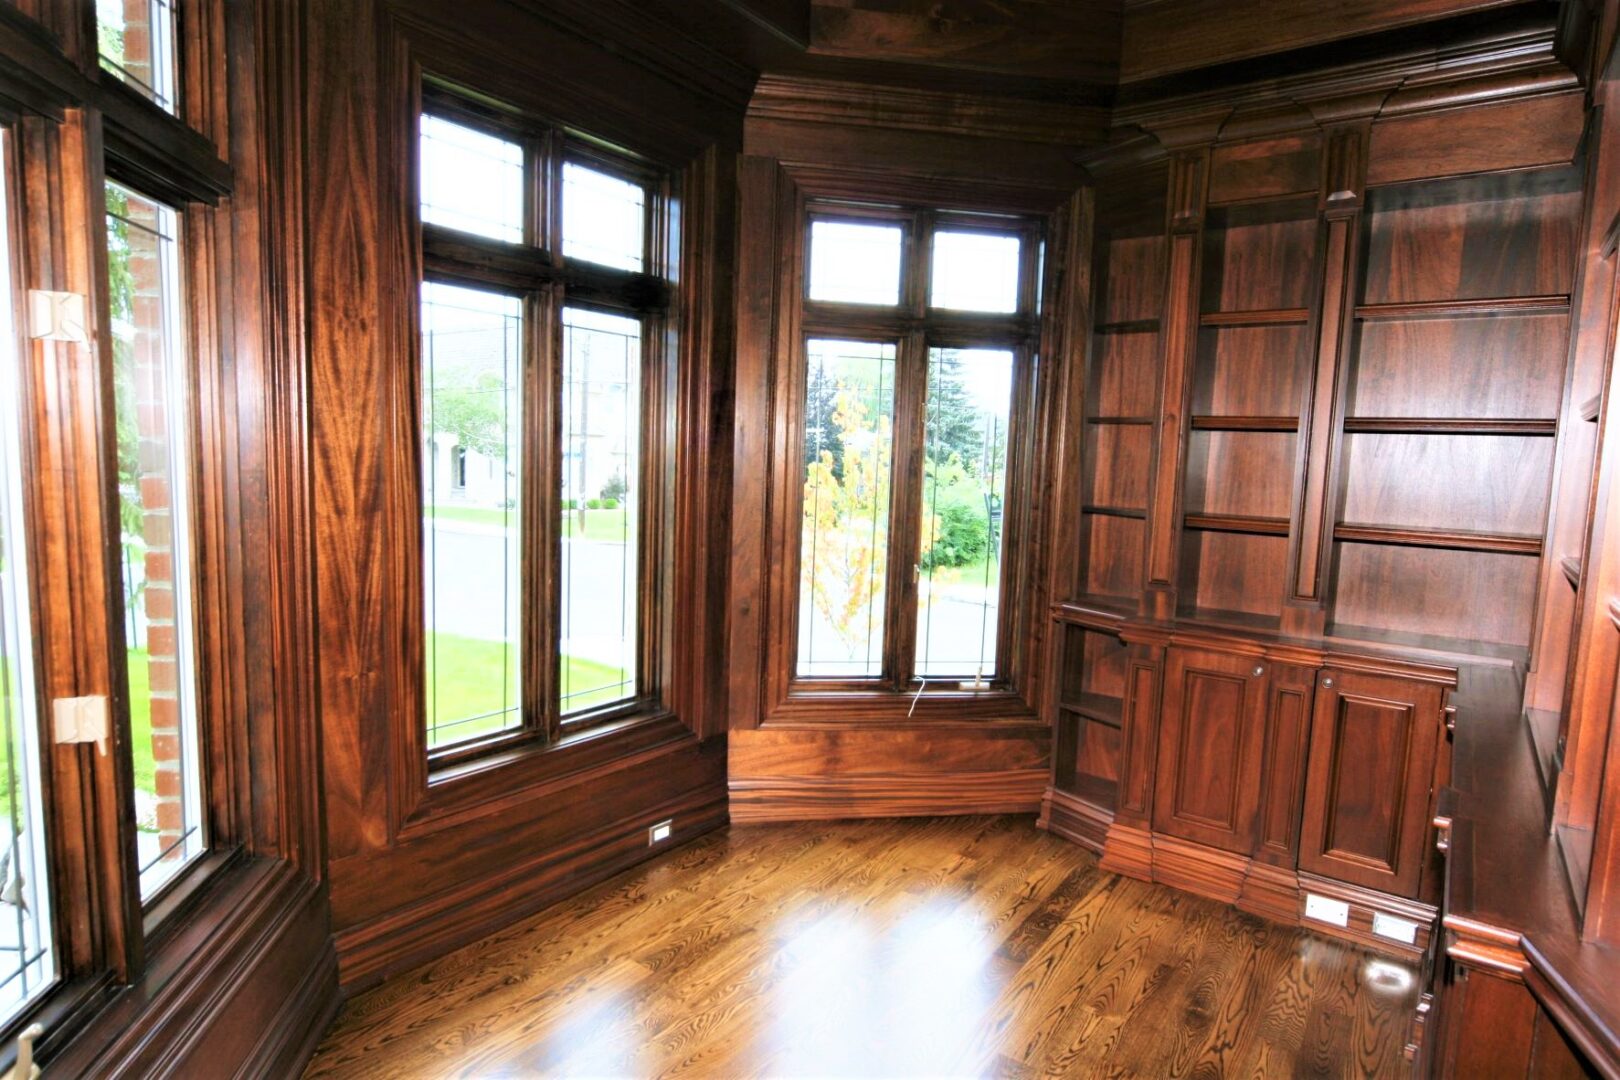 A Wooden Shelf Corner With Large Glass Doors